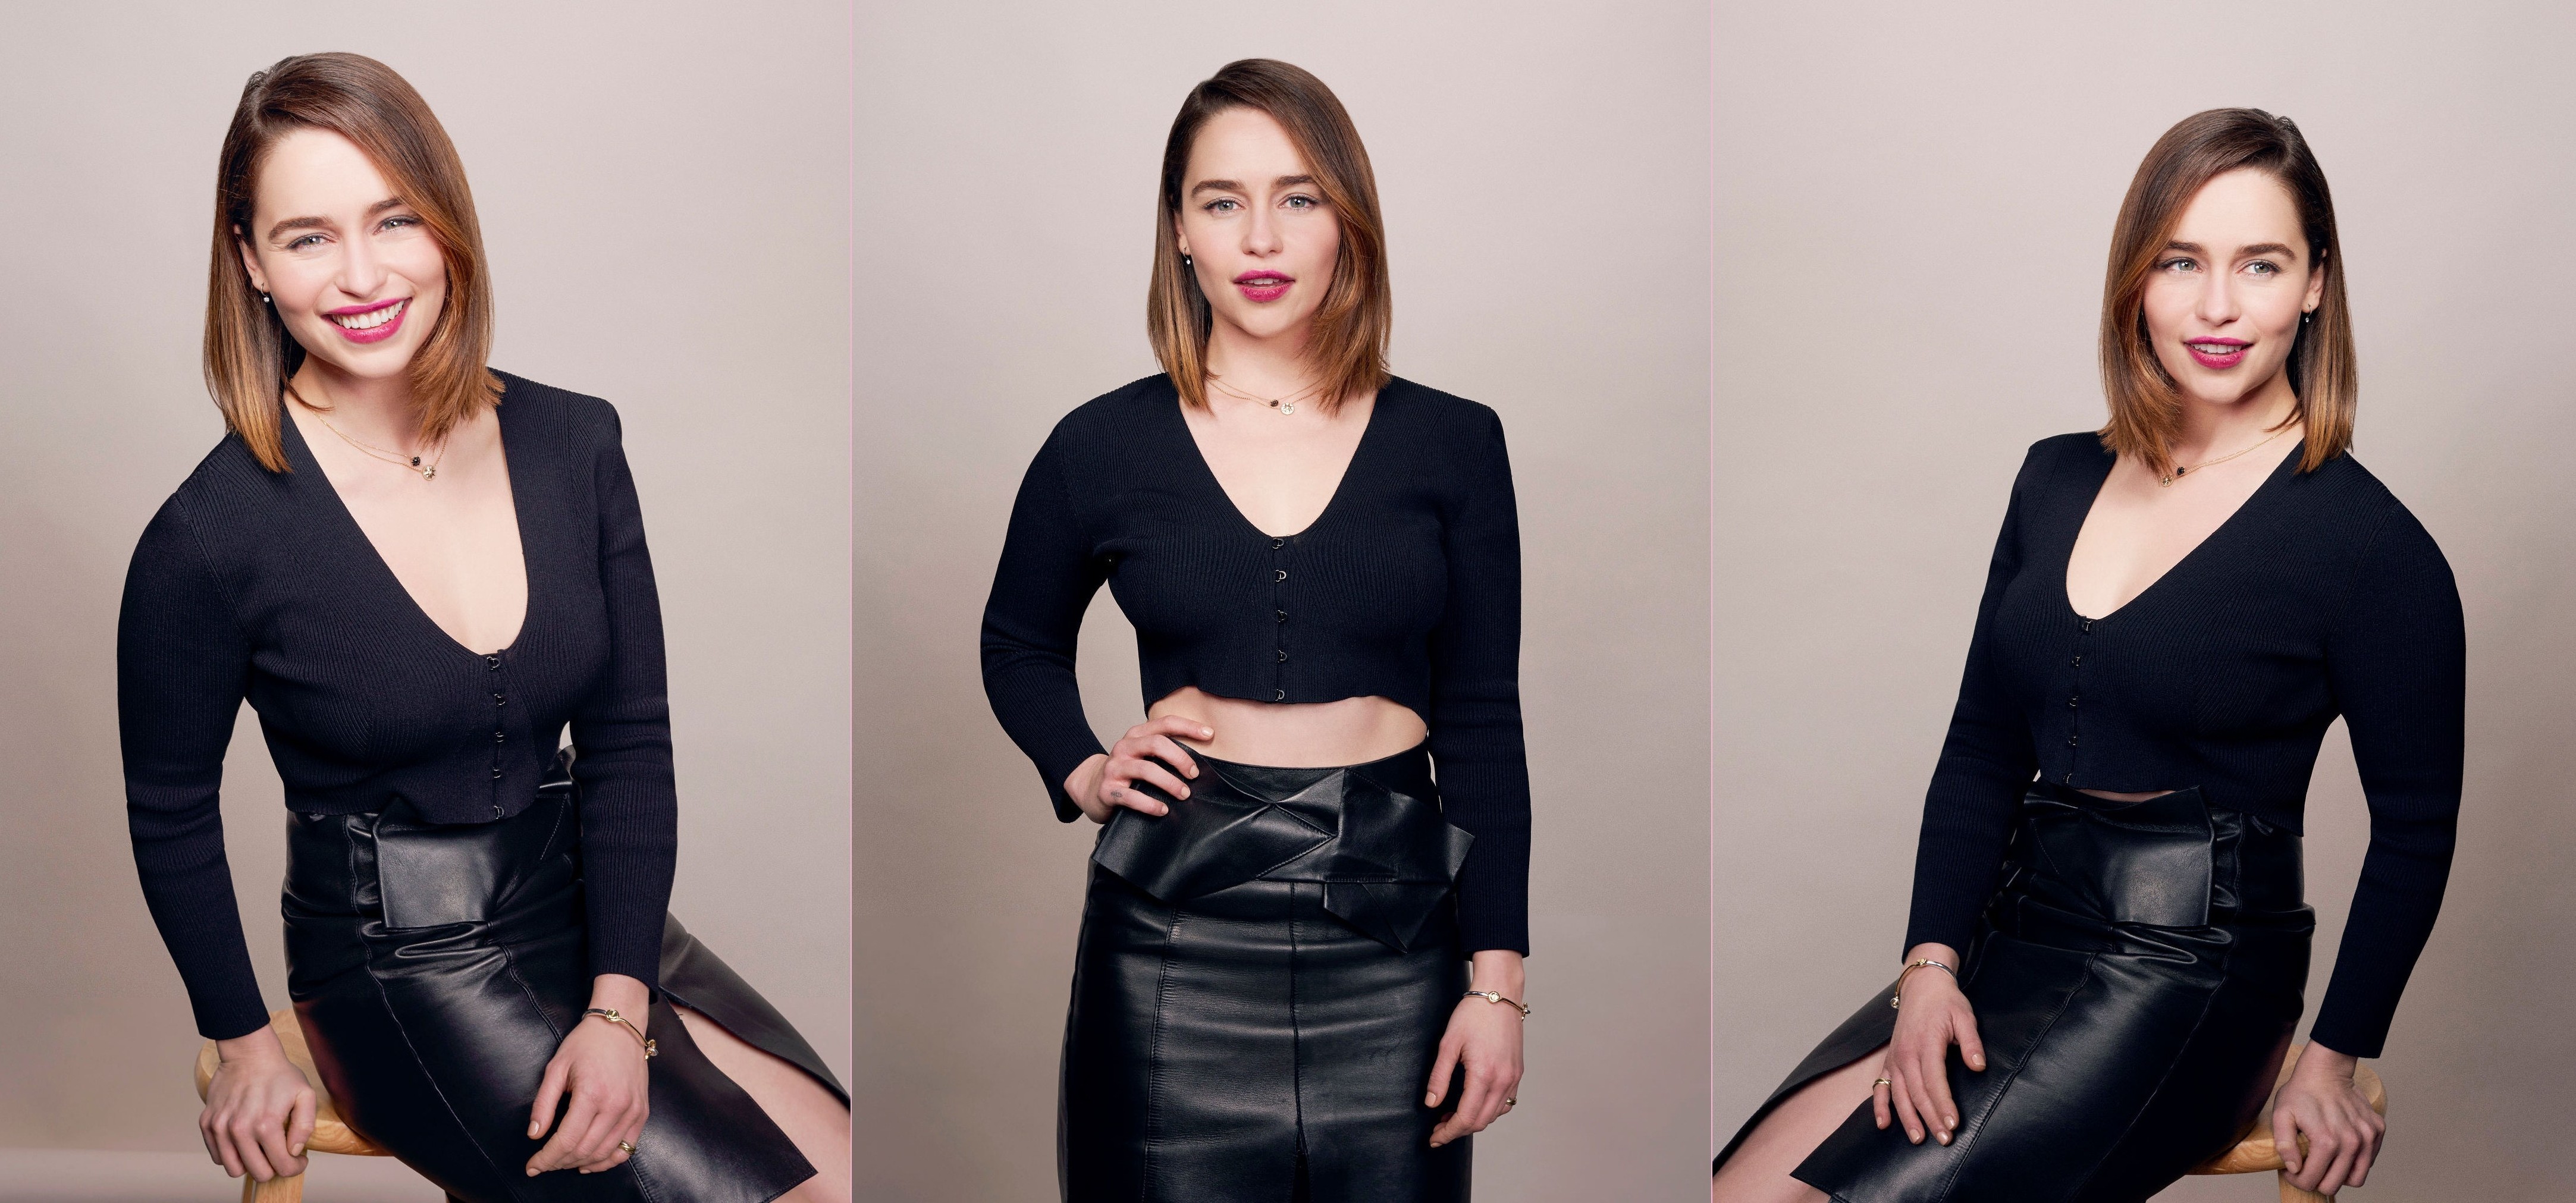 actress, Emilia Clarke, Celebrity, Women, Collage, Smiling, Leather Skirts Wallpaper